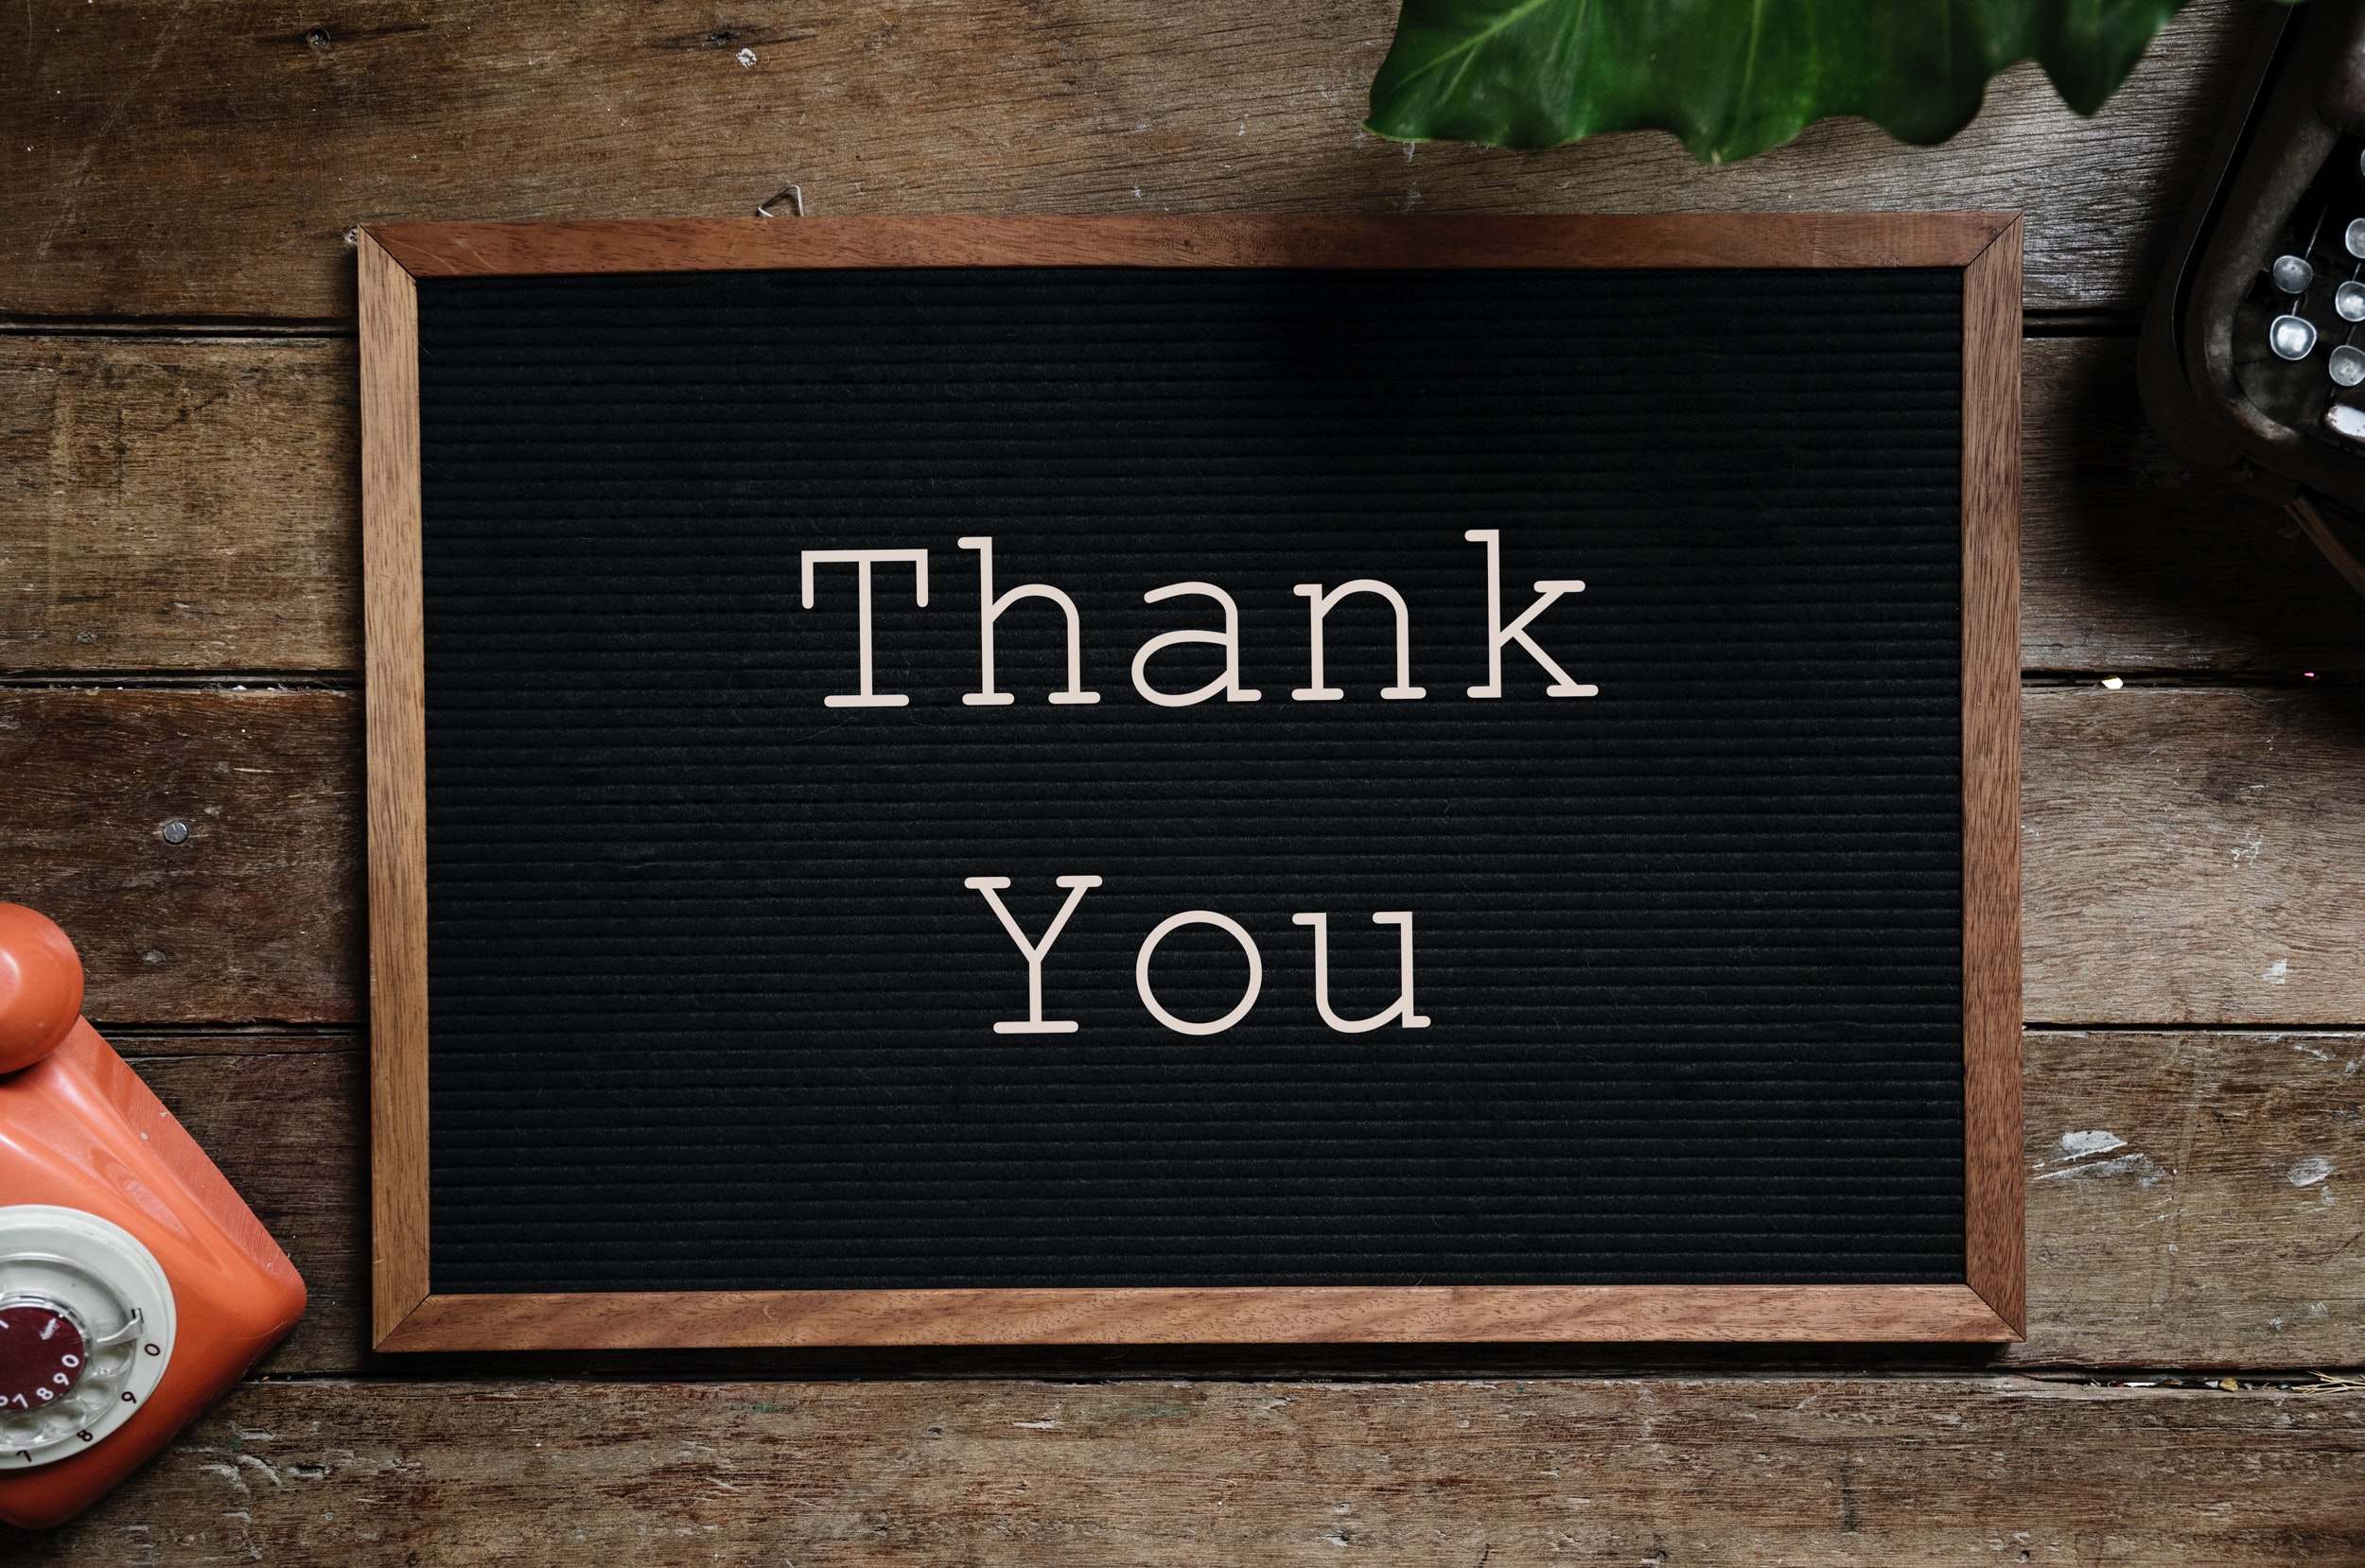 Thank You Text on Black and Brown Board, Blackboard, Board, Close -up, Display, HQ Photo